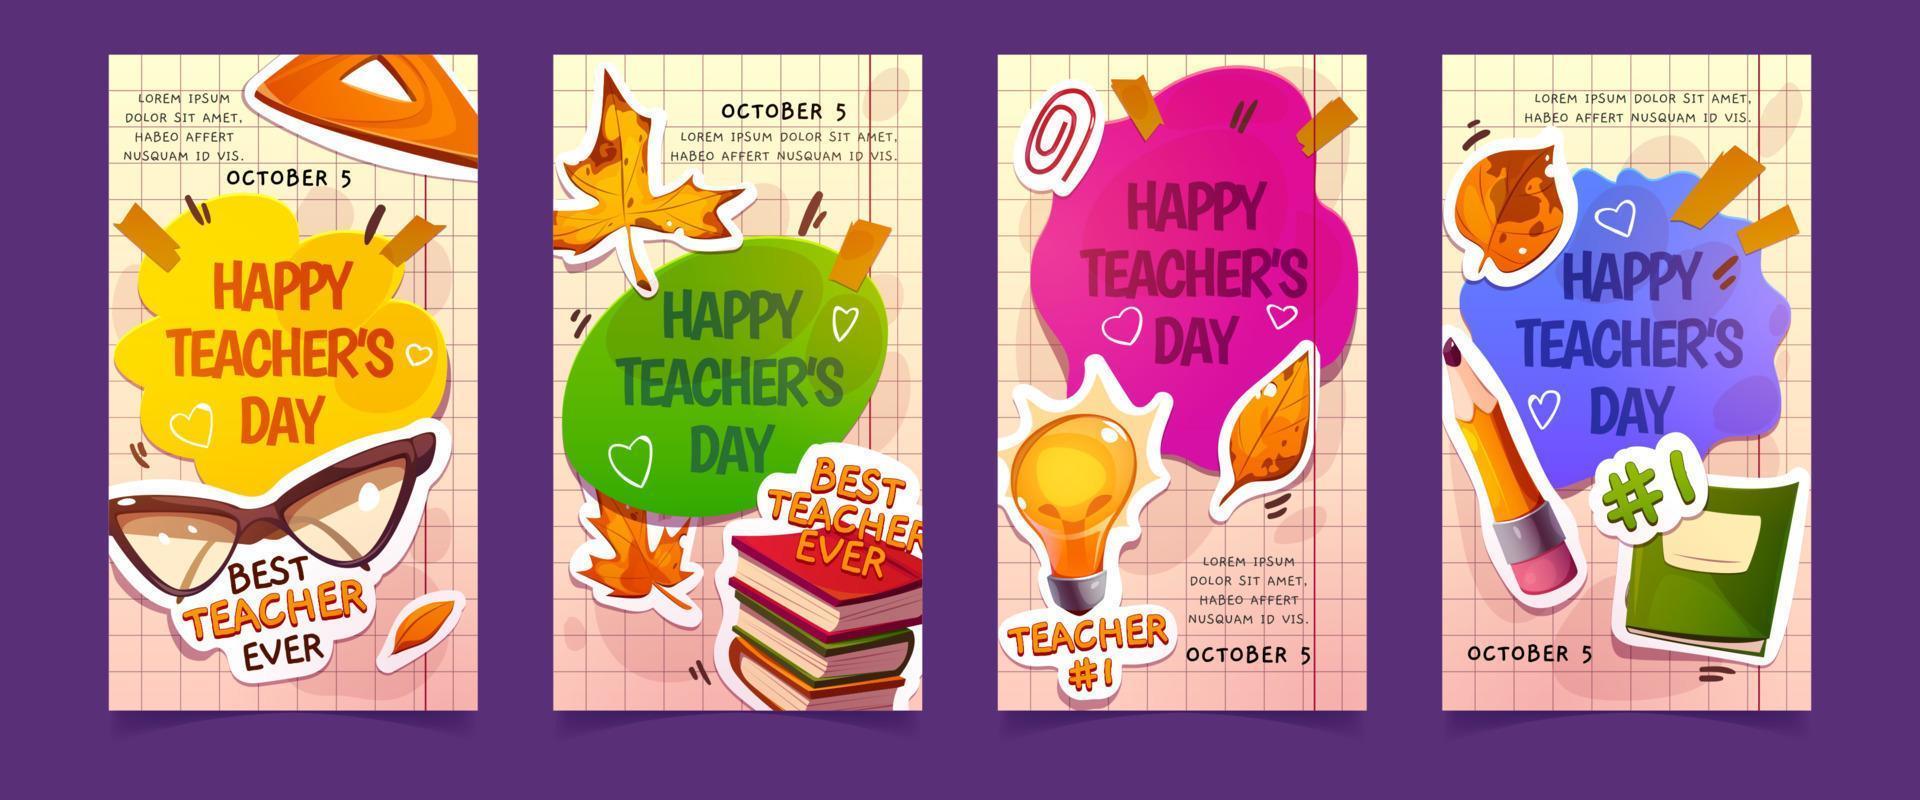 Happy teachers day posters with books, glasses vector